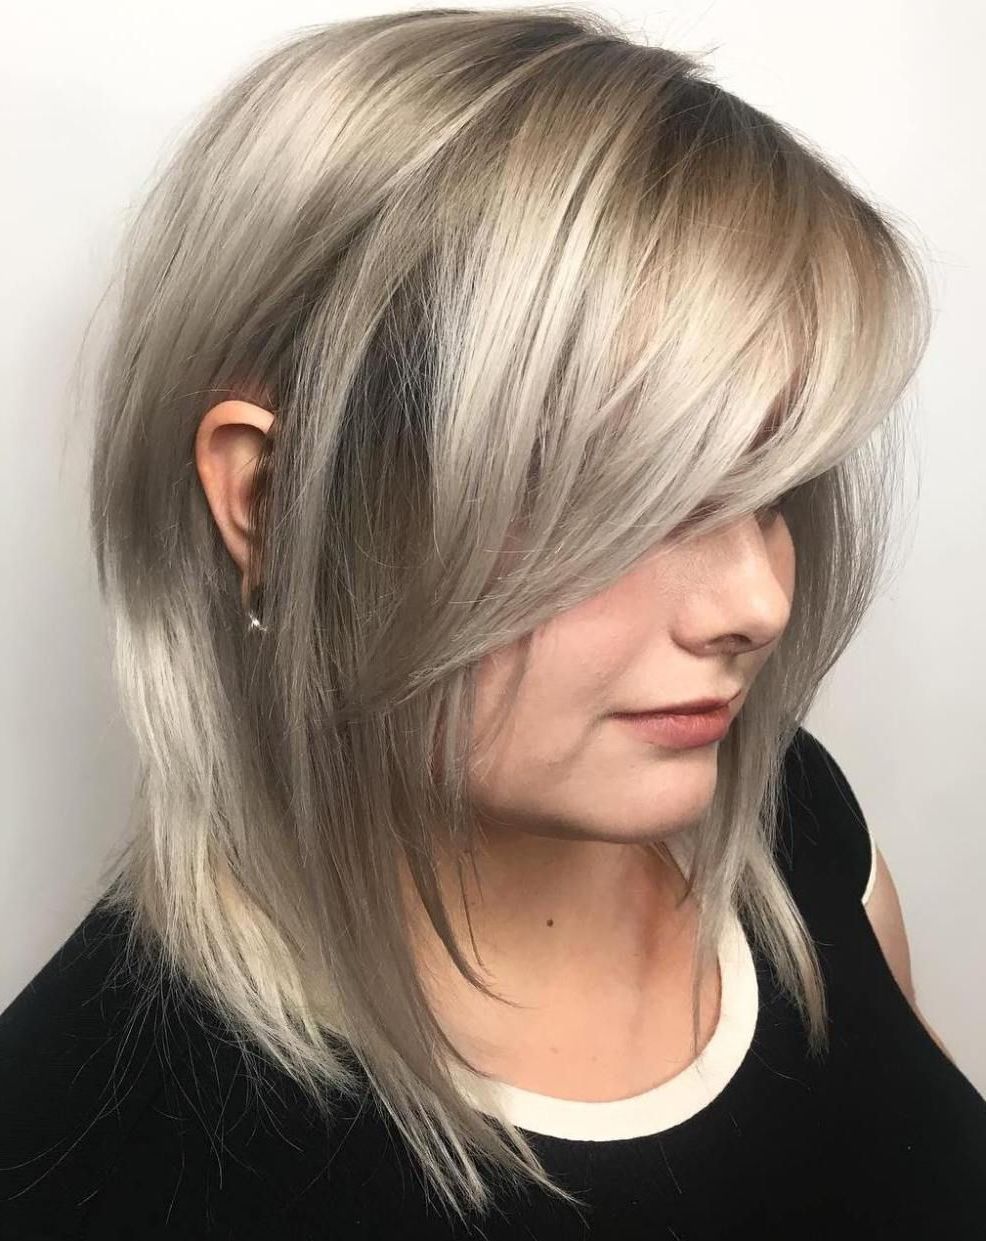 Long Bangs And Textured Ends | Bob Haircut With Bangs, Long Pertaining To Side Parted Bob Hairstyles With Textured Ends (View 9 of 20)